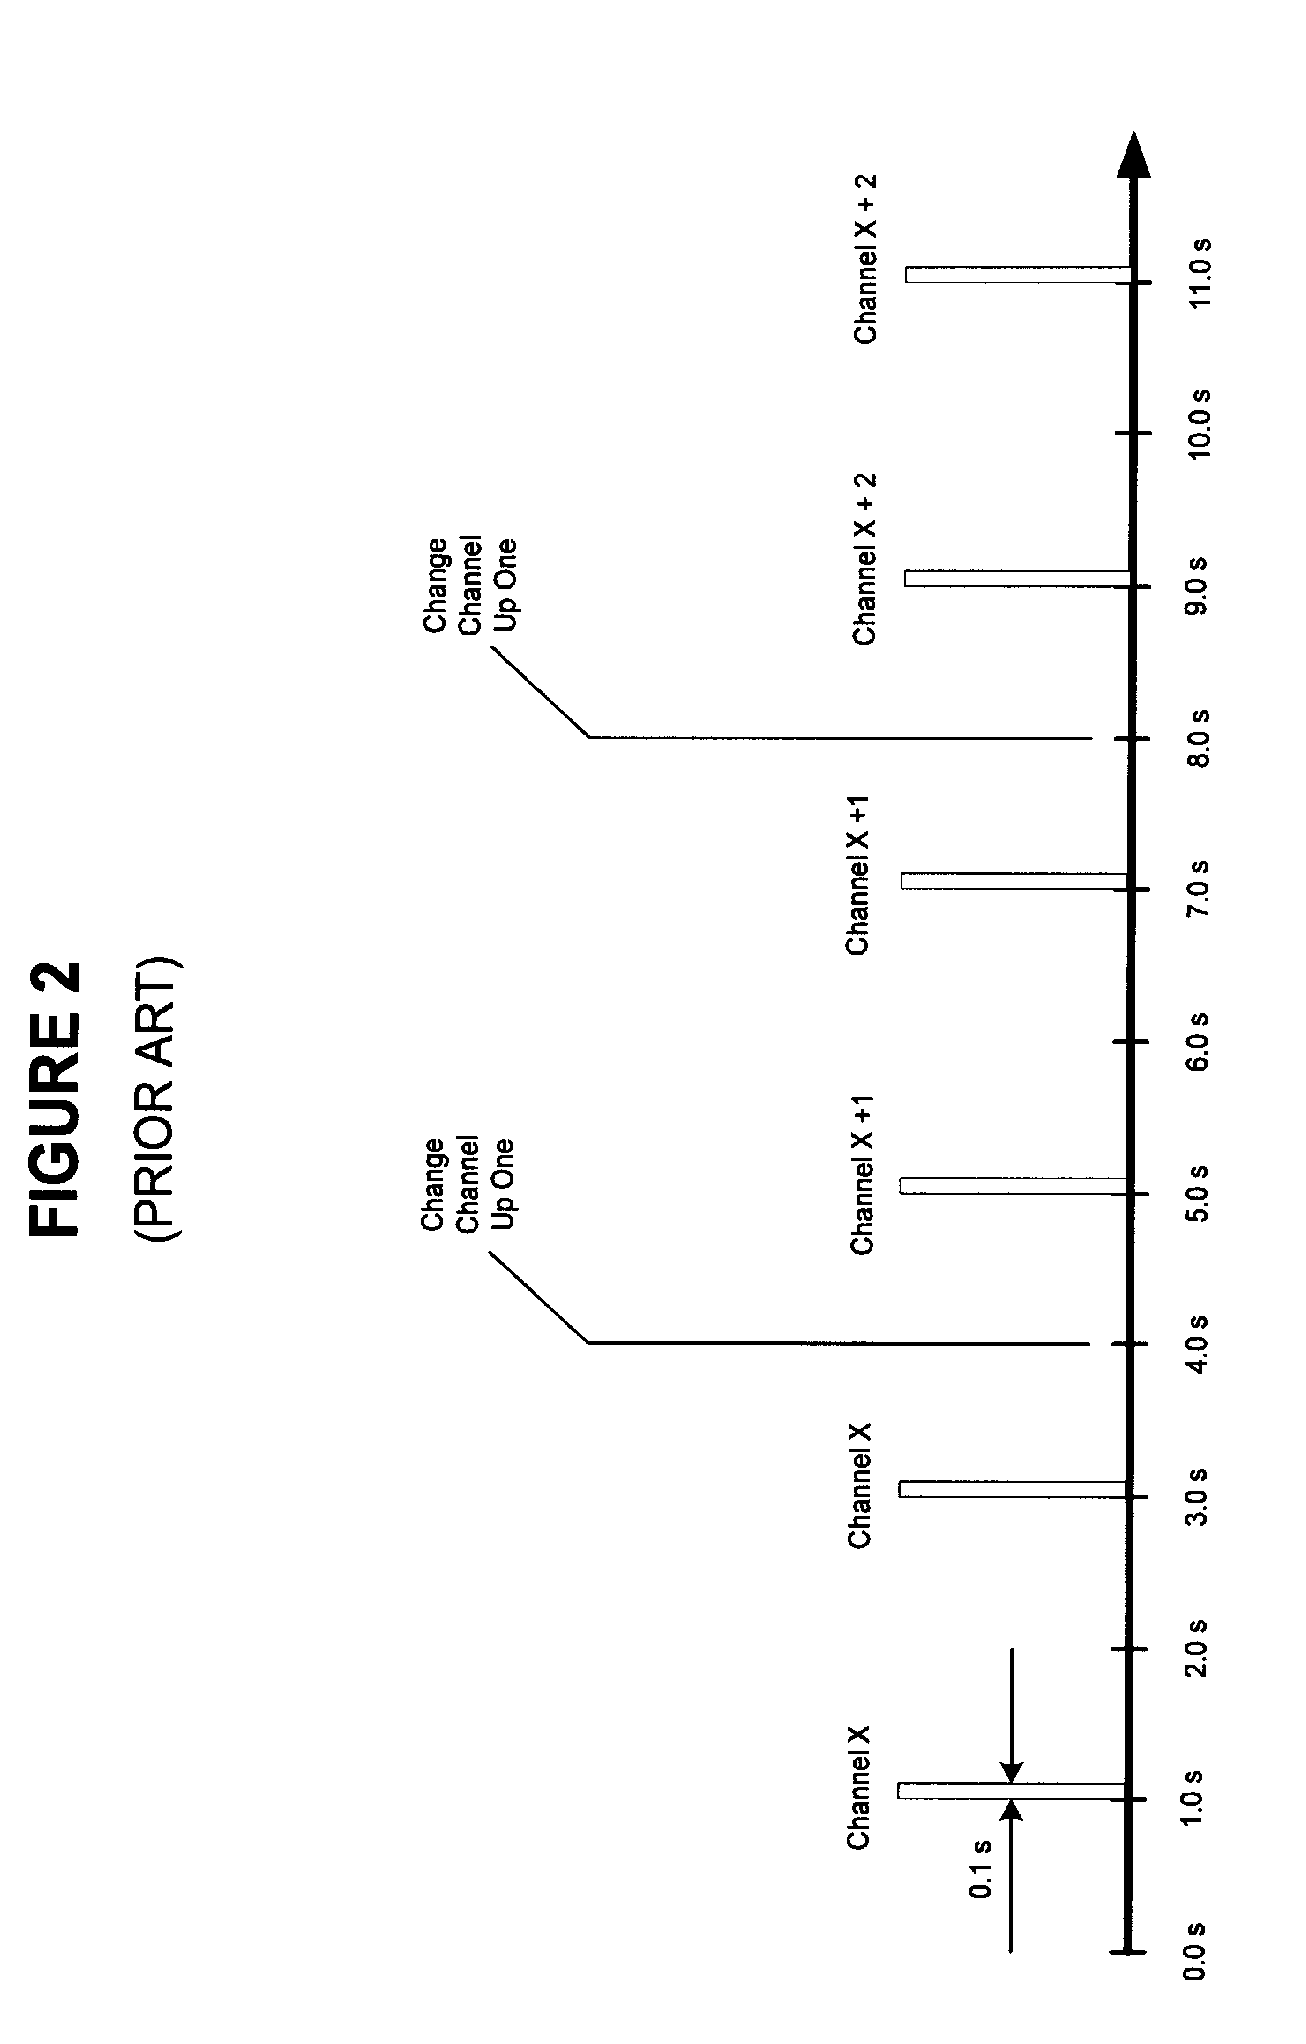 Mobile television channel switching system and method